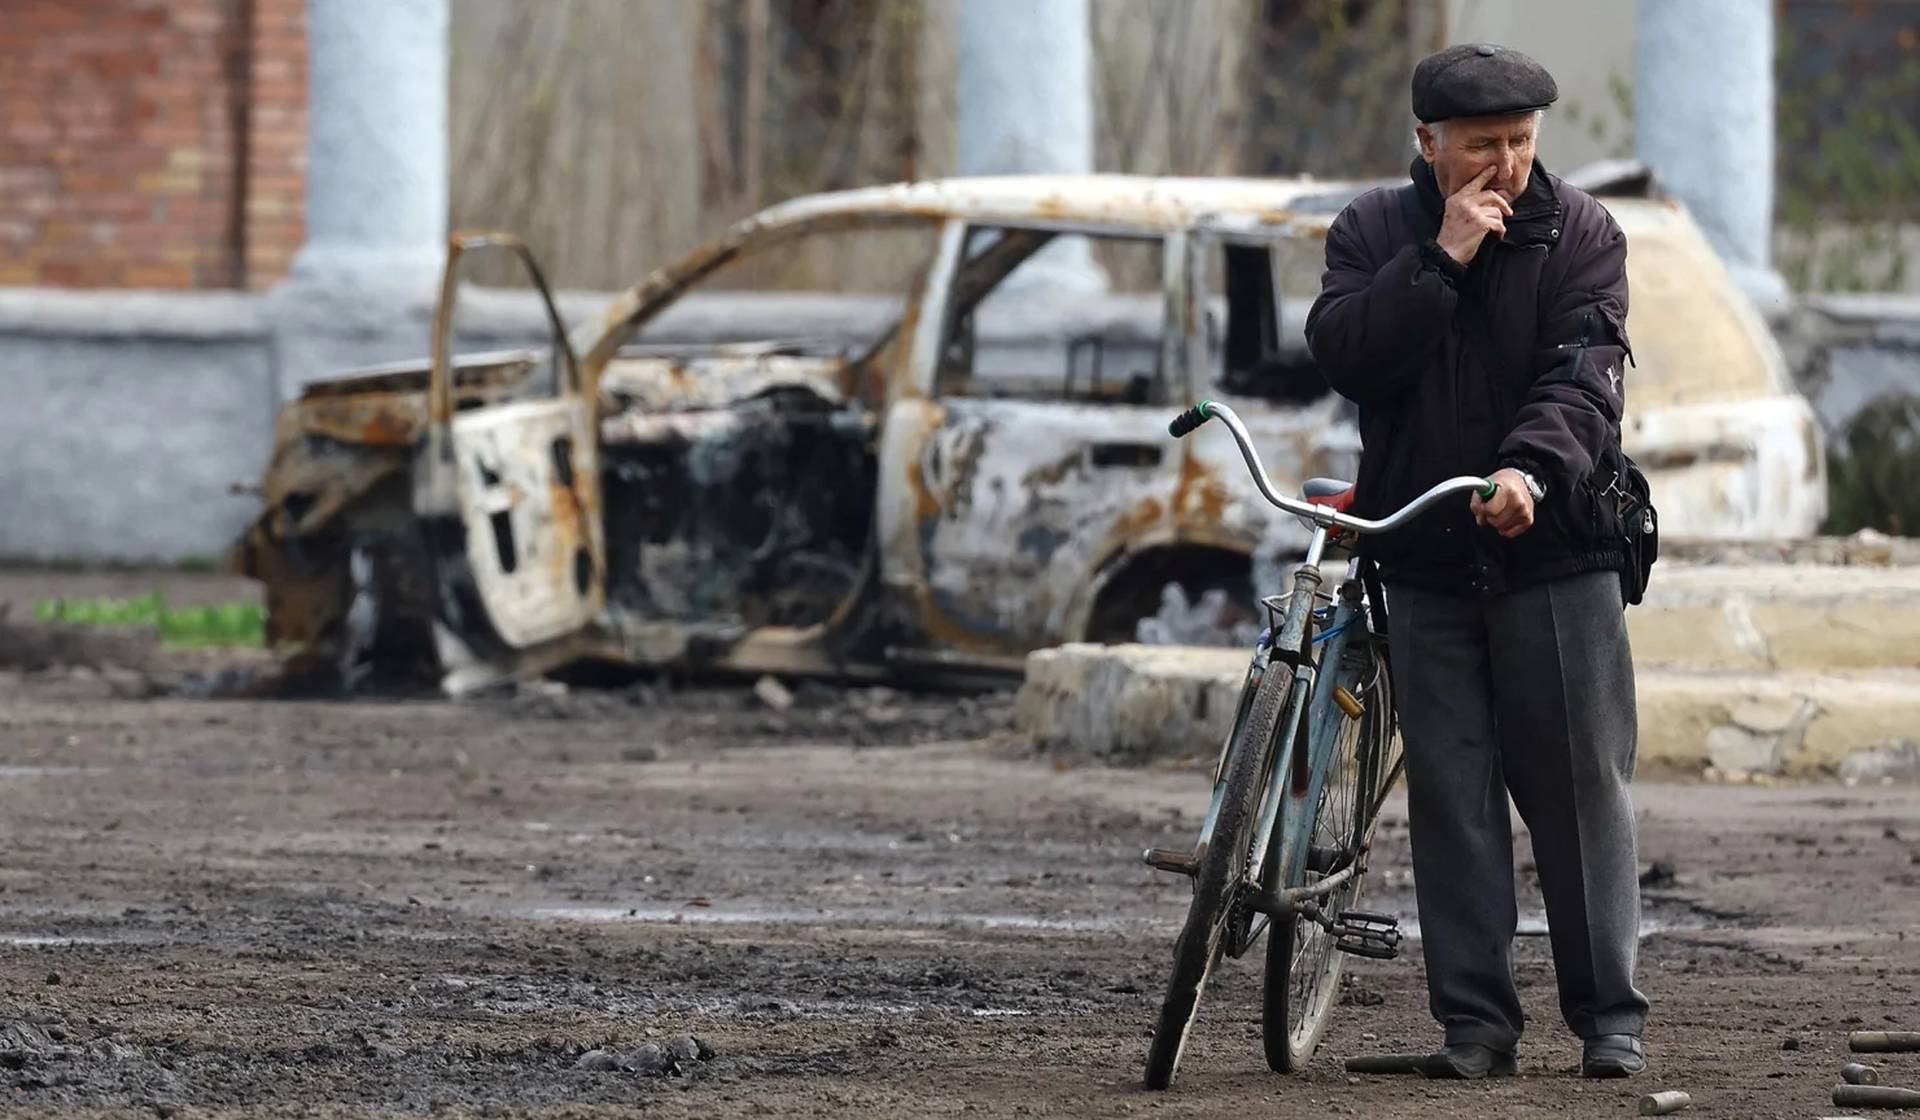 A villager near a wracked car during heavy fighting at the front line in Chasiv Yar